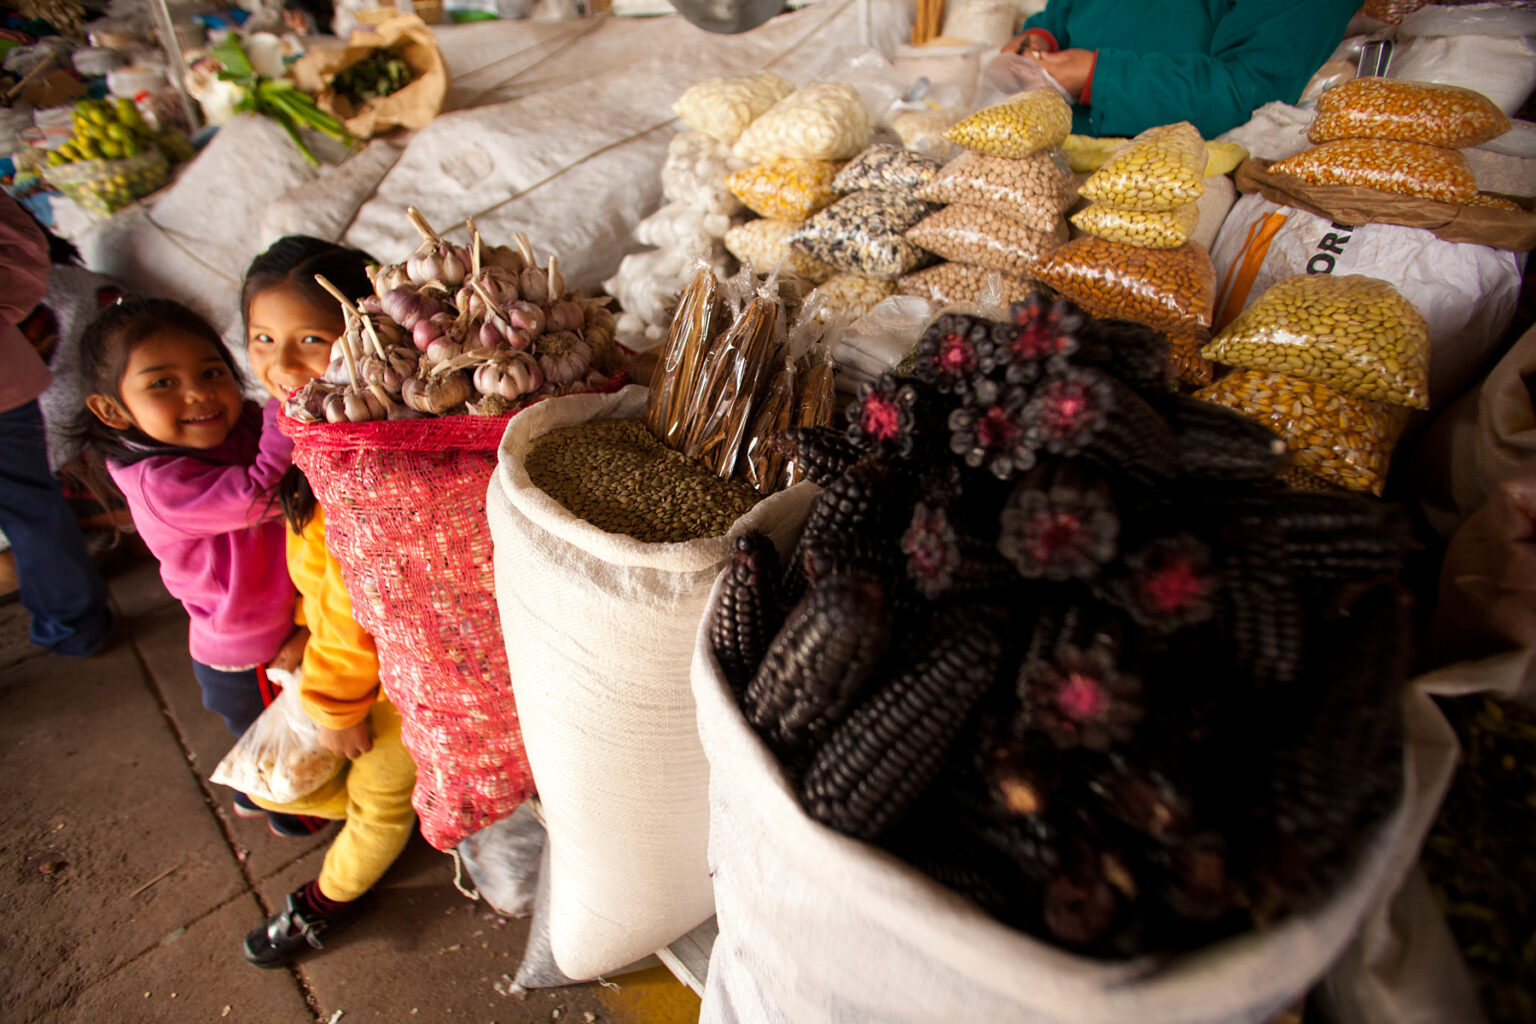 Children hide in front of bags of Peruvian grains for sale.